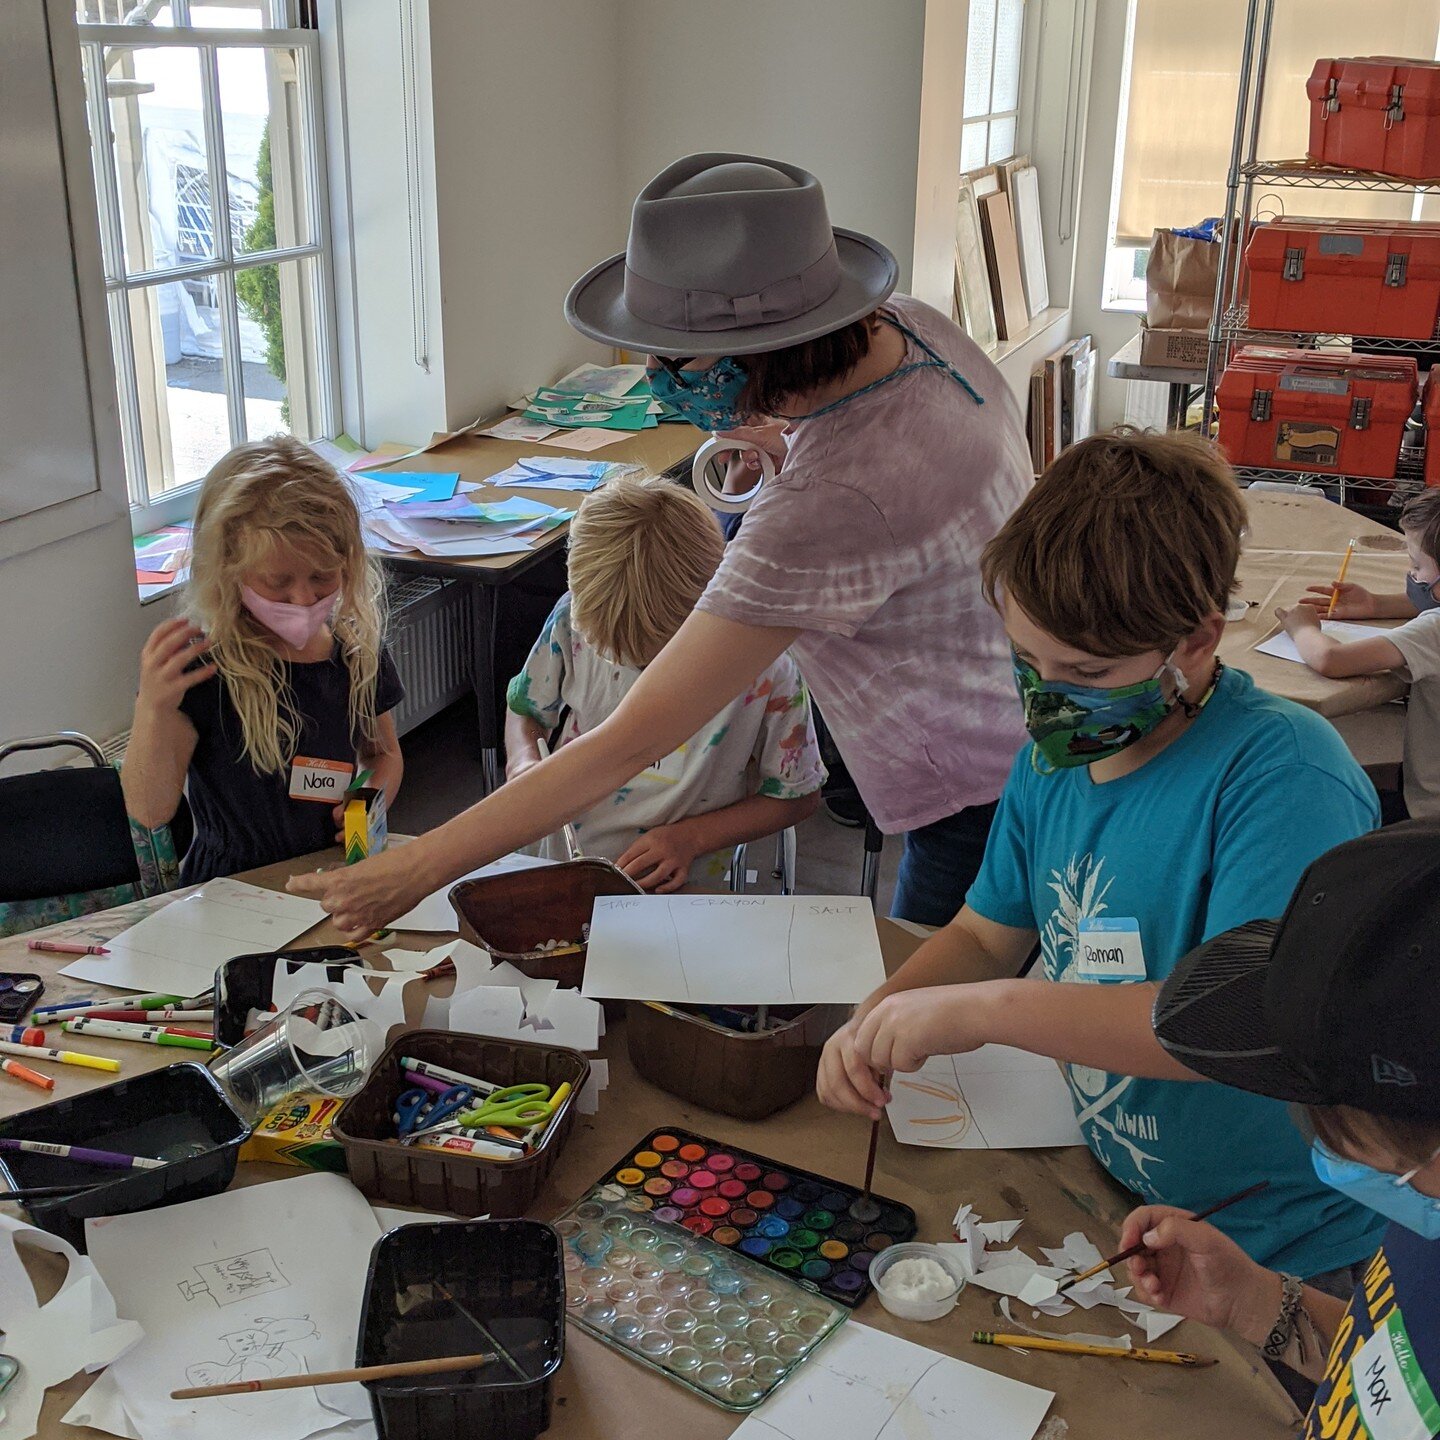 Artwork comes in a lot of shapes and sizes. 
#camp510 #oaklandiscreative #oakland #cardboardcity #summercamp #artists #makers #whatwillyoumake #childartists